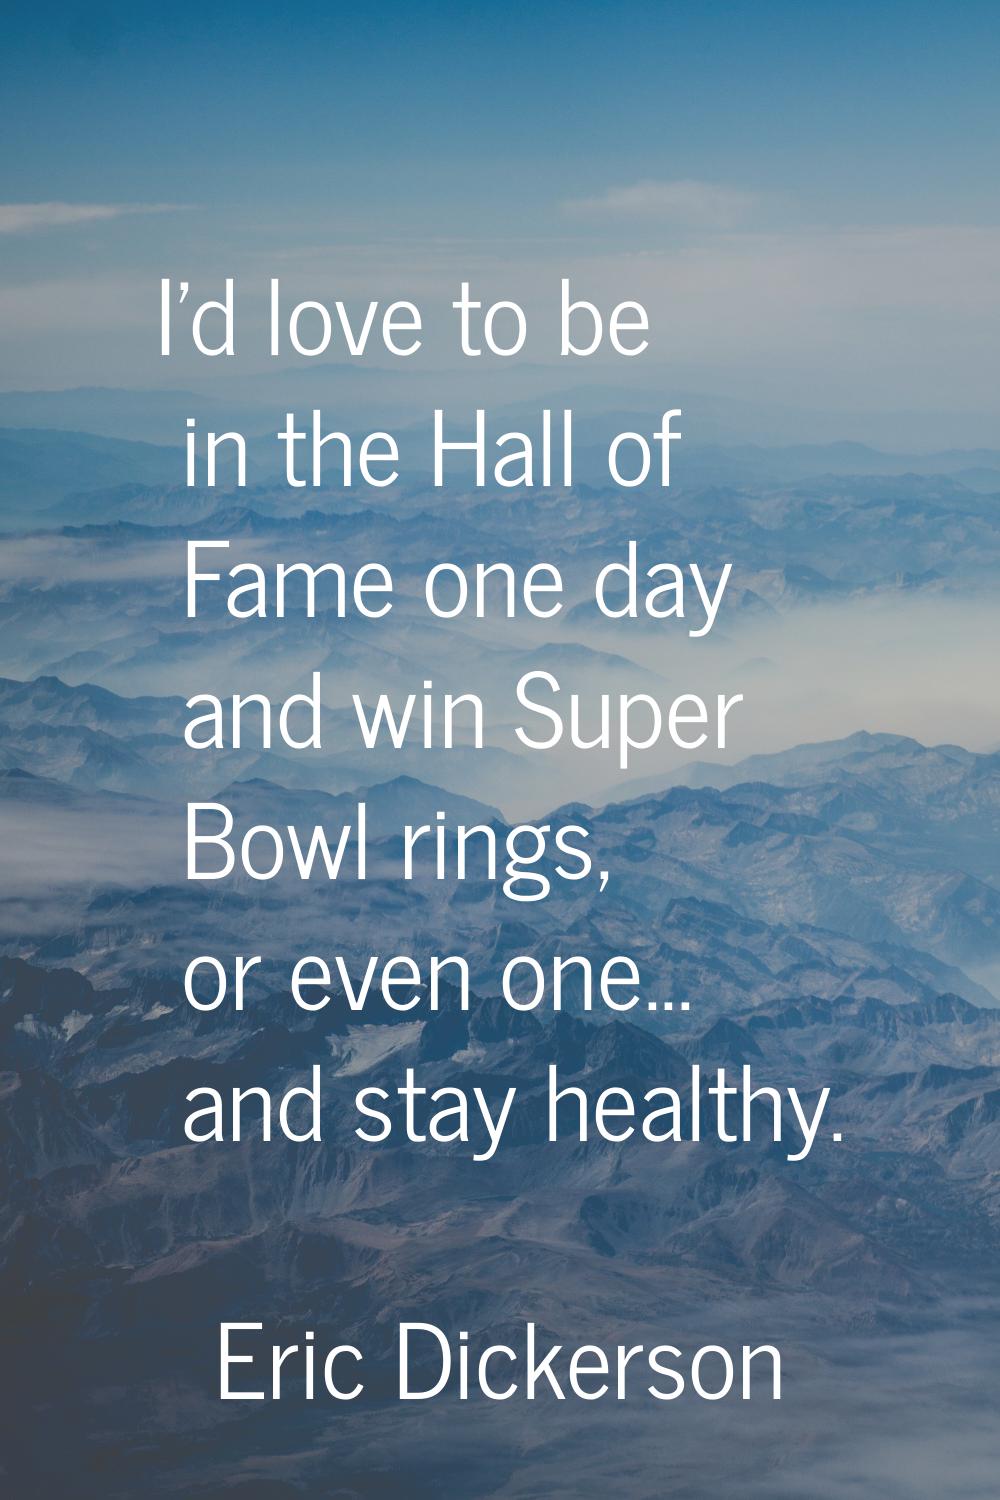 I'd love to be in the Hall of Fame one day and win Super Bowl rings, or even one... and stay health